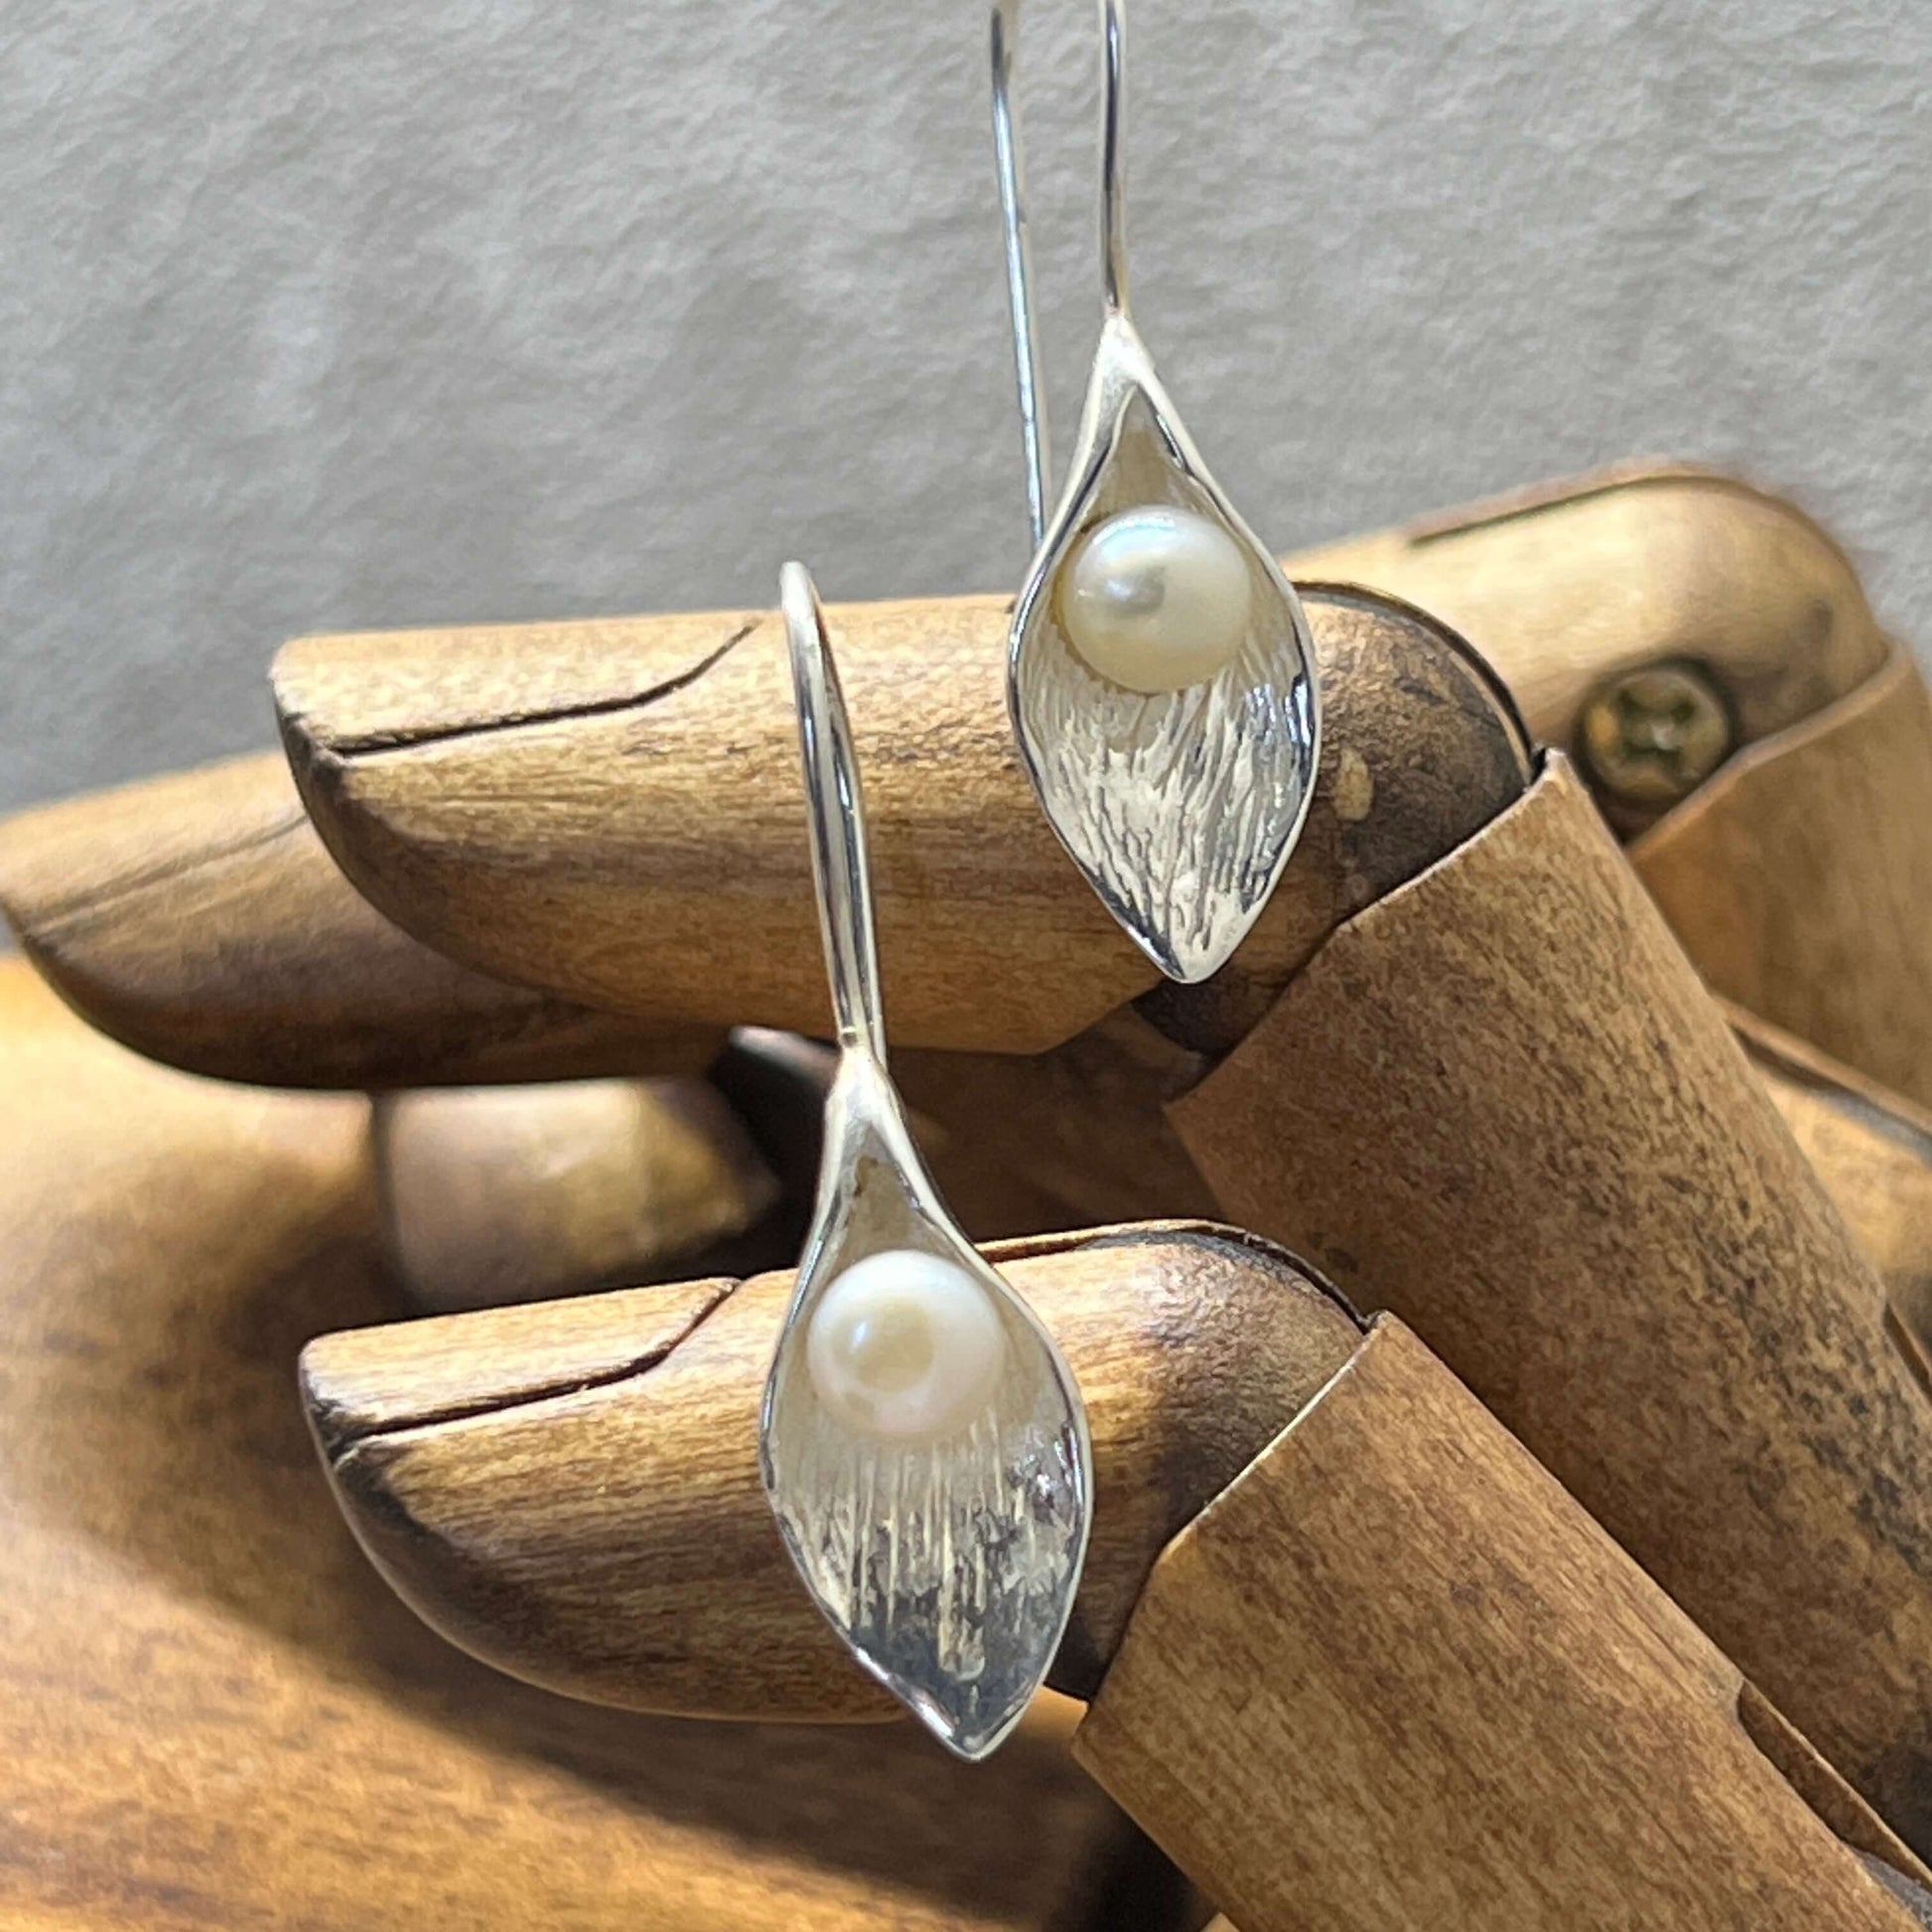 Hand Crafted Calla Lily in Sterling Silver & Freshwater Pearl Earrings - Twelve Silver Trees